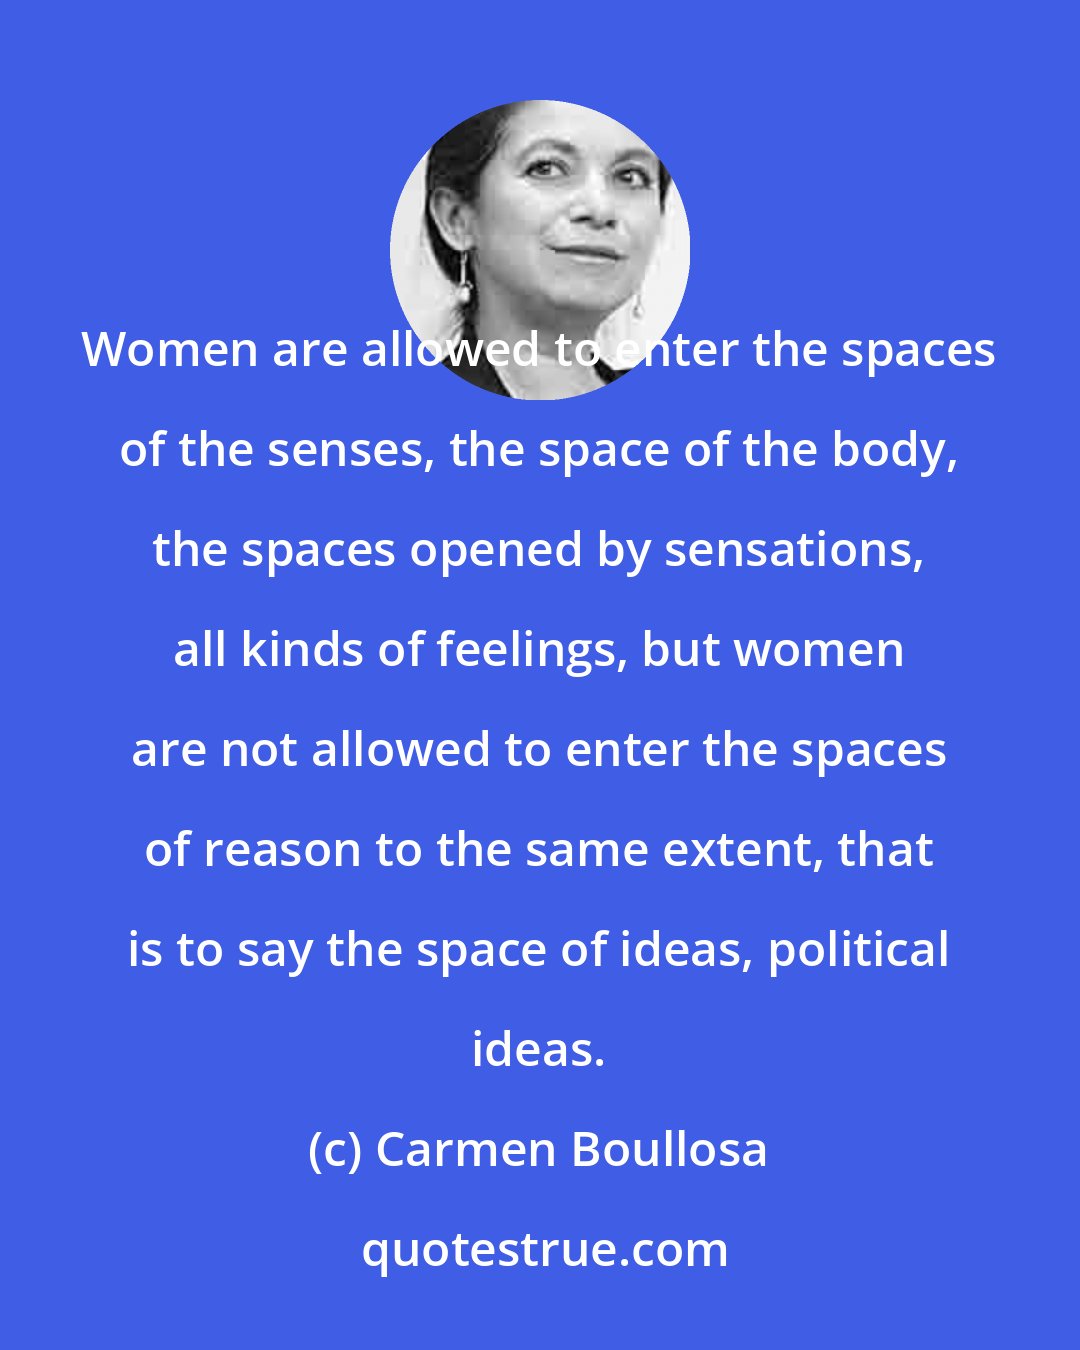 Carmen Boullosa: Women are allowed to enter the spaces of the senses, the space of the body, the spaces opened by sensations, all kinds of feelings, but women are not allowed to enter the spaces of reason to the same extent, that is to say the space of ideas, political ideas.